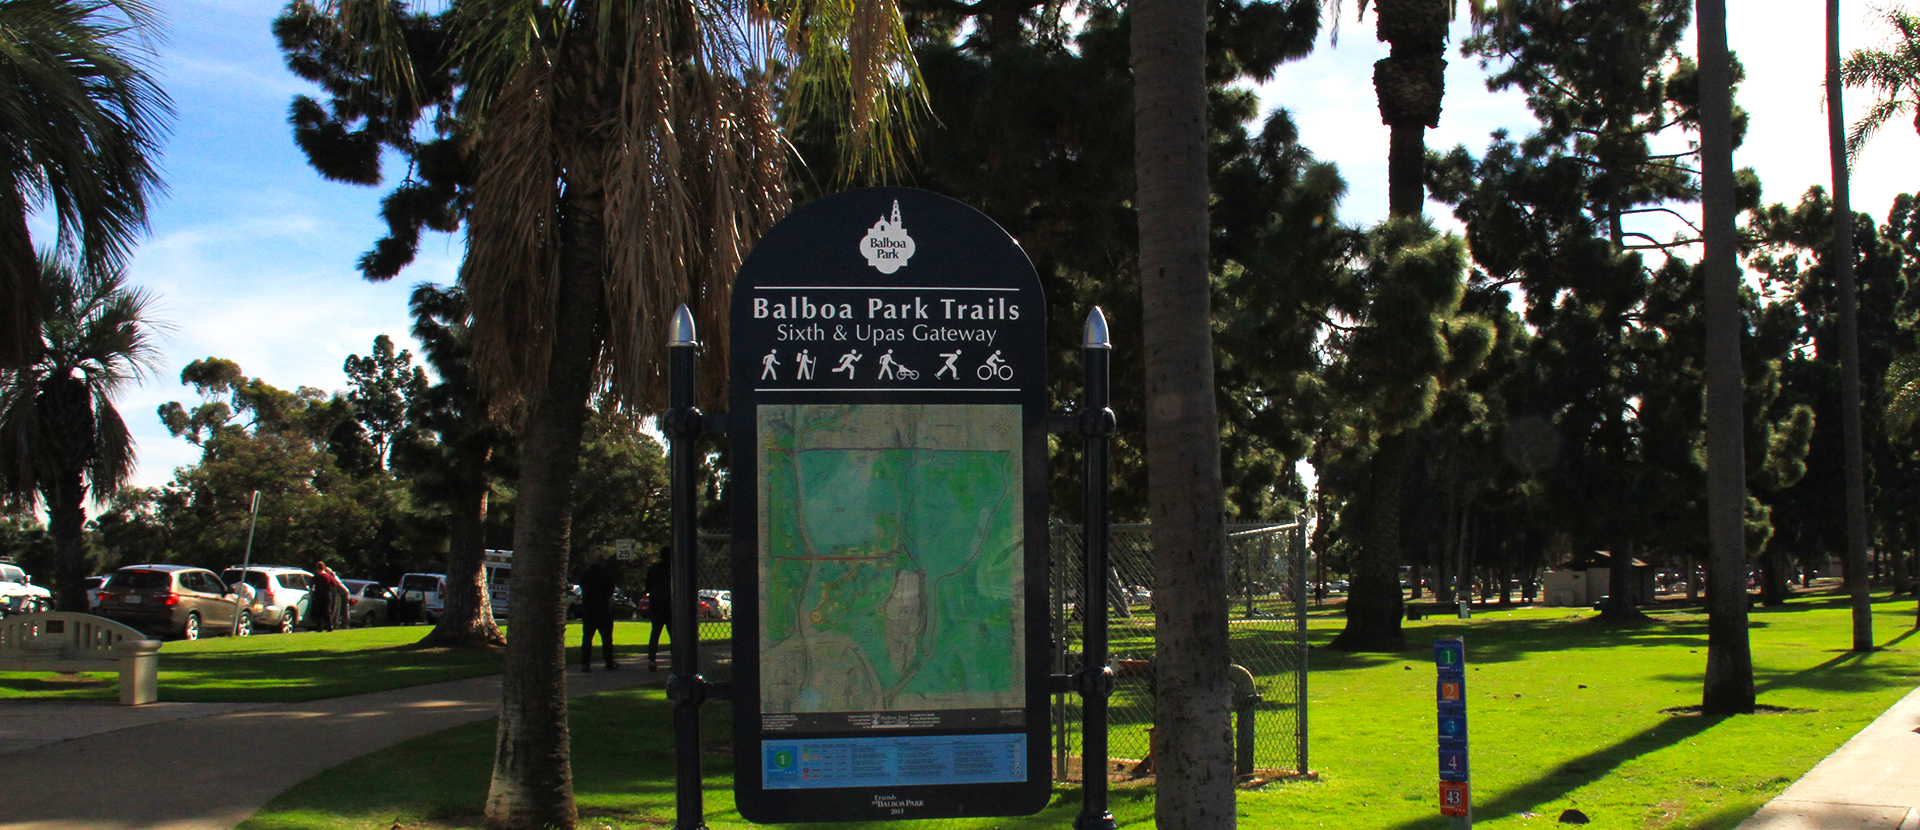 Balboa Park Trails sign for Sixth & Upas Gateway with a trail map and legend. A parking lot and trees surrounding the entrance to the trail are in the background.